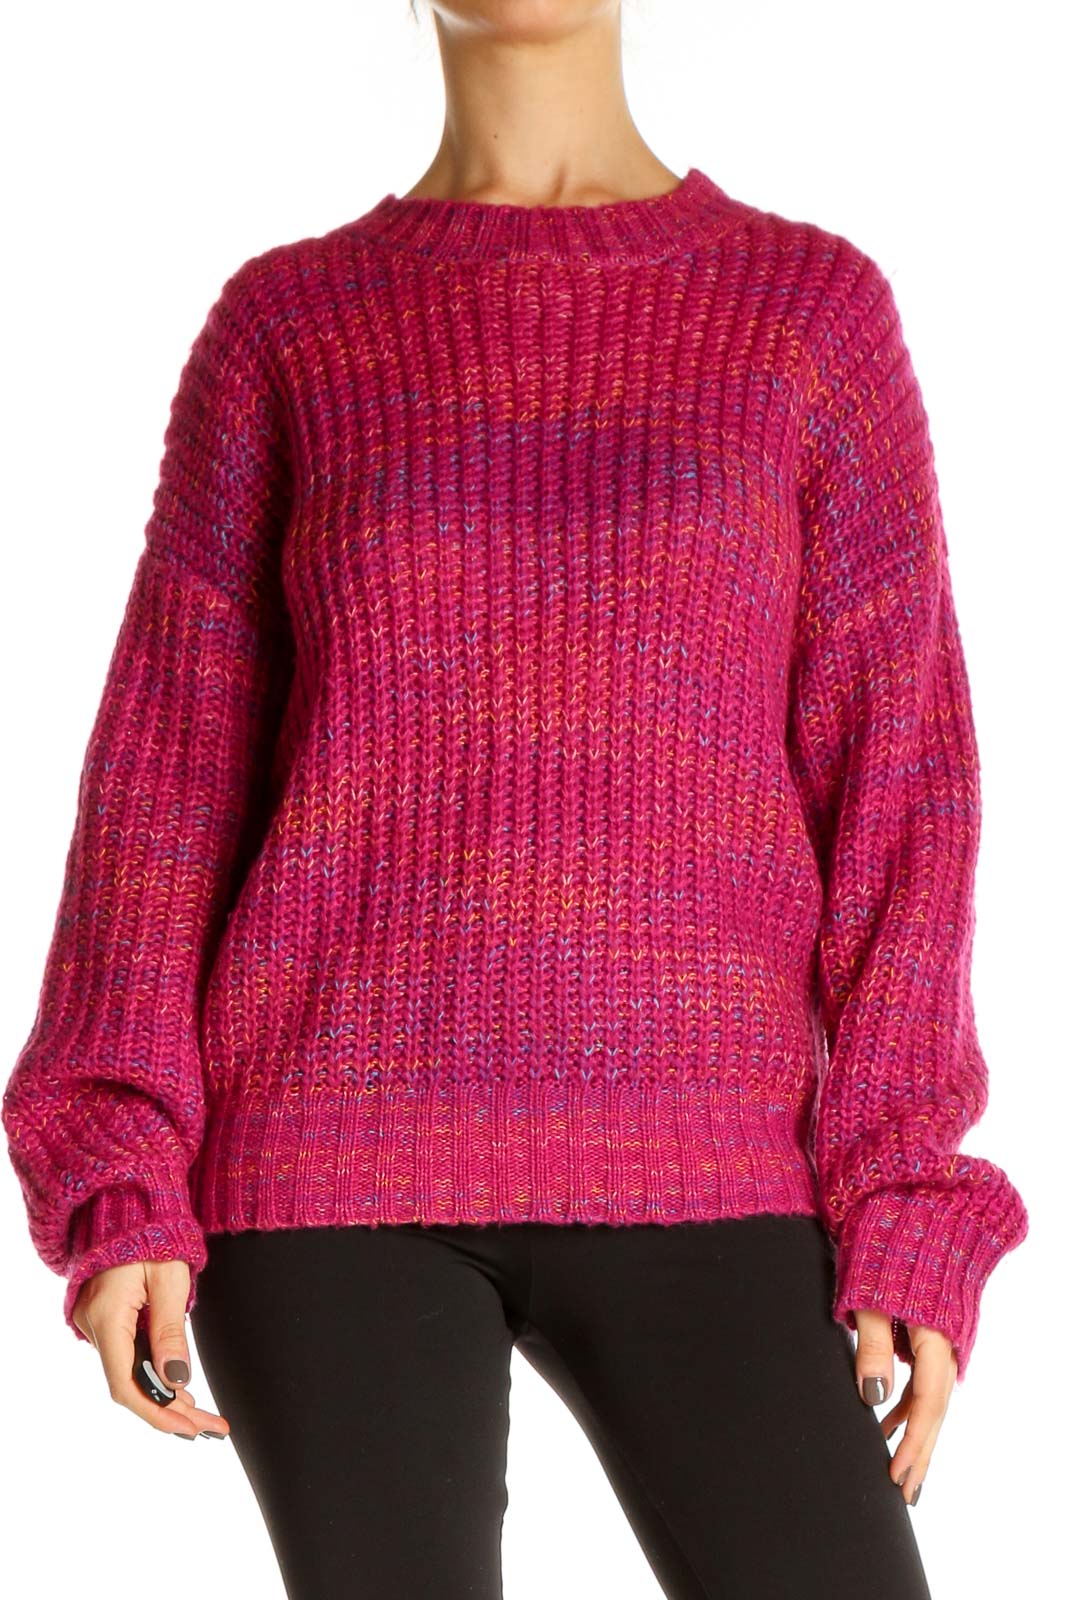 Pink Textured All Day Wear Sweater Front